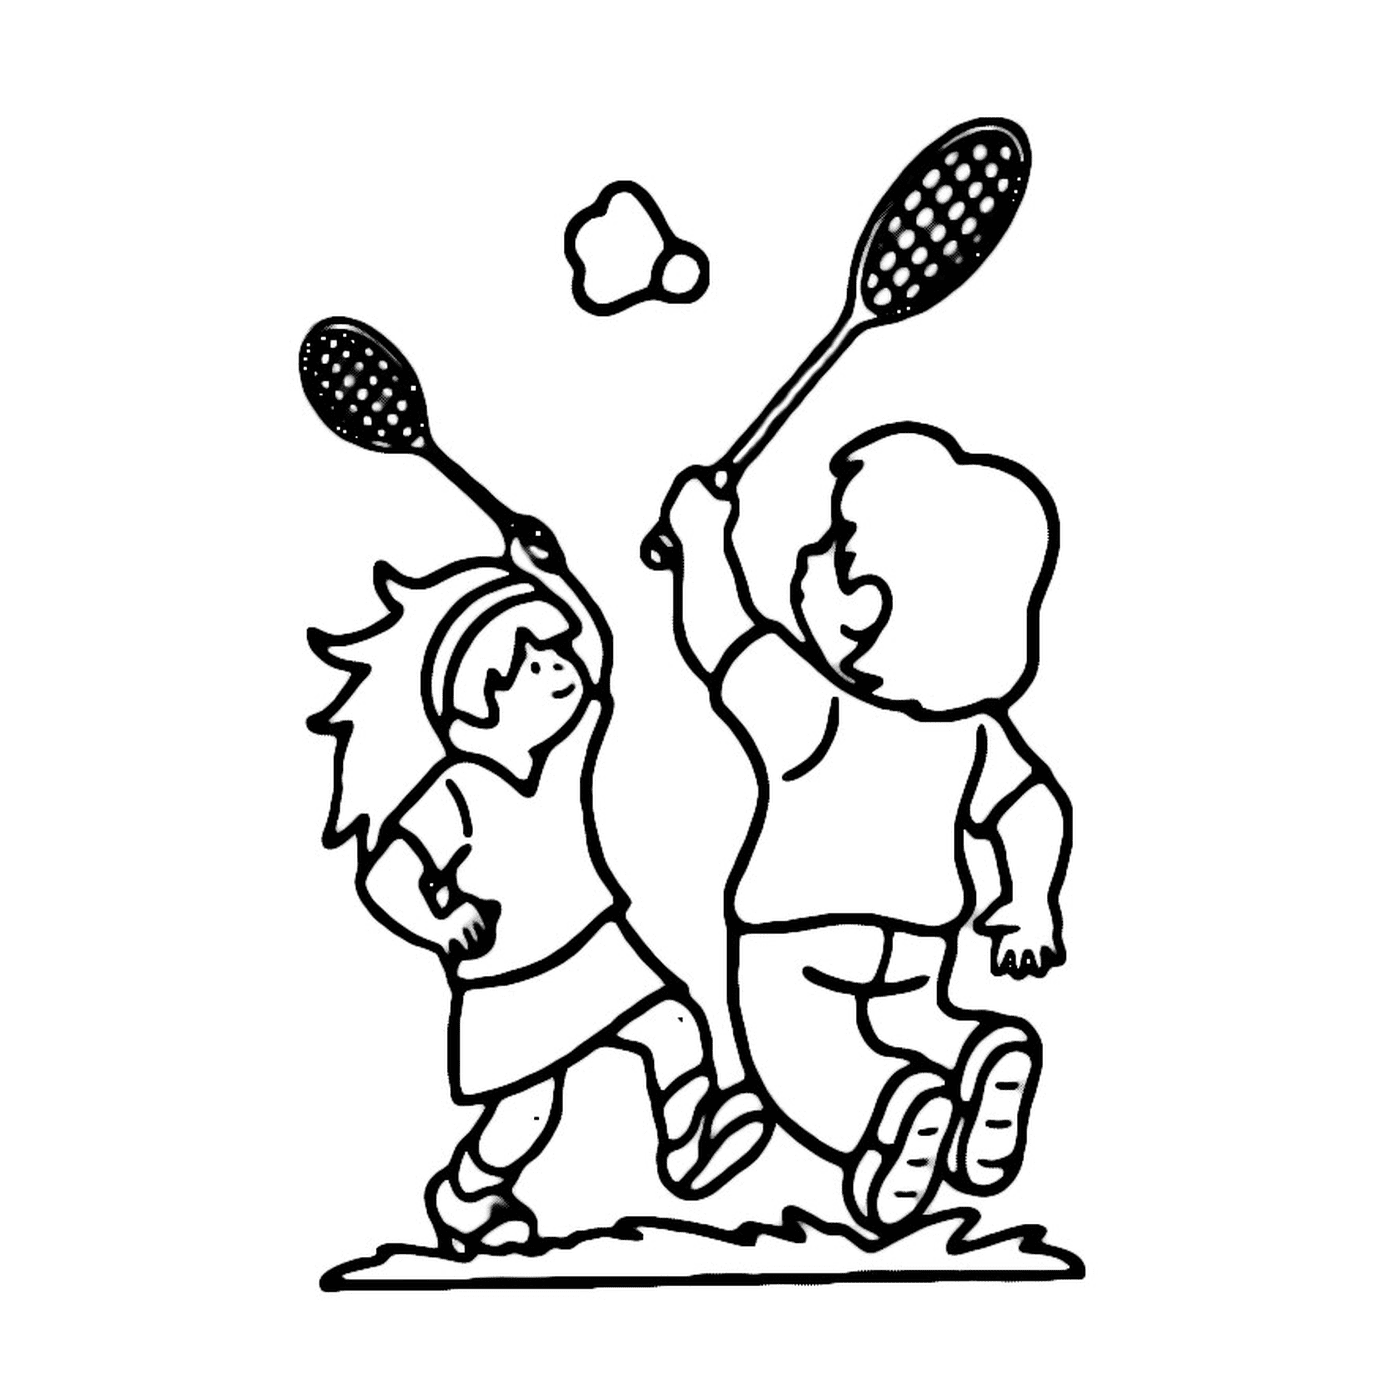  Two children play badminton in a field 